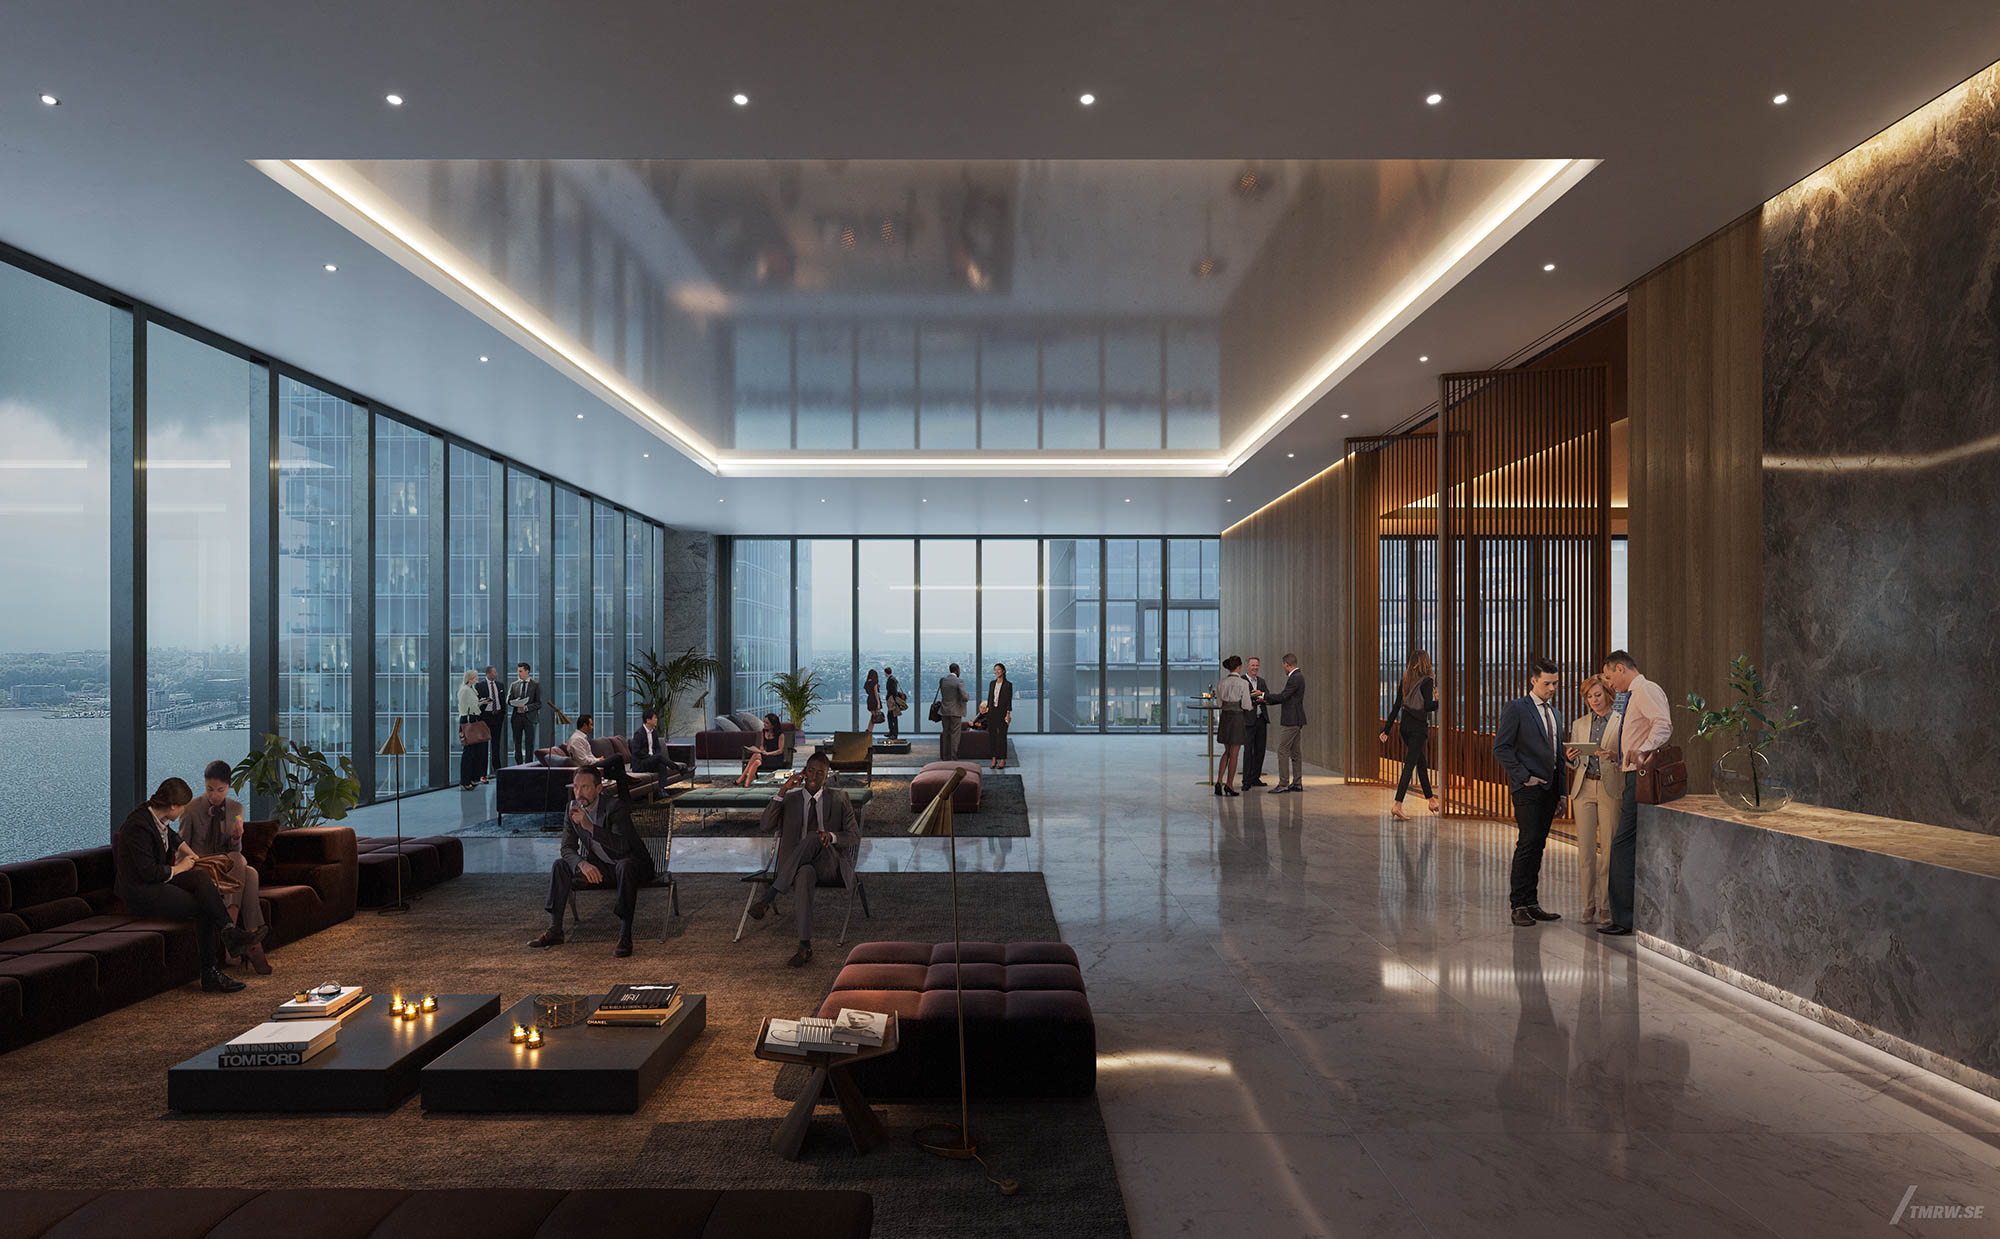 Architectural visualization of 50 Hudson Yards for Foster & Partners, a office in dusk light from an interior view.